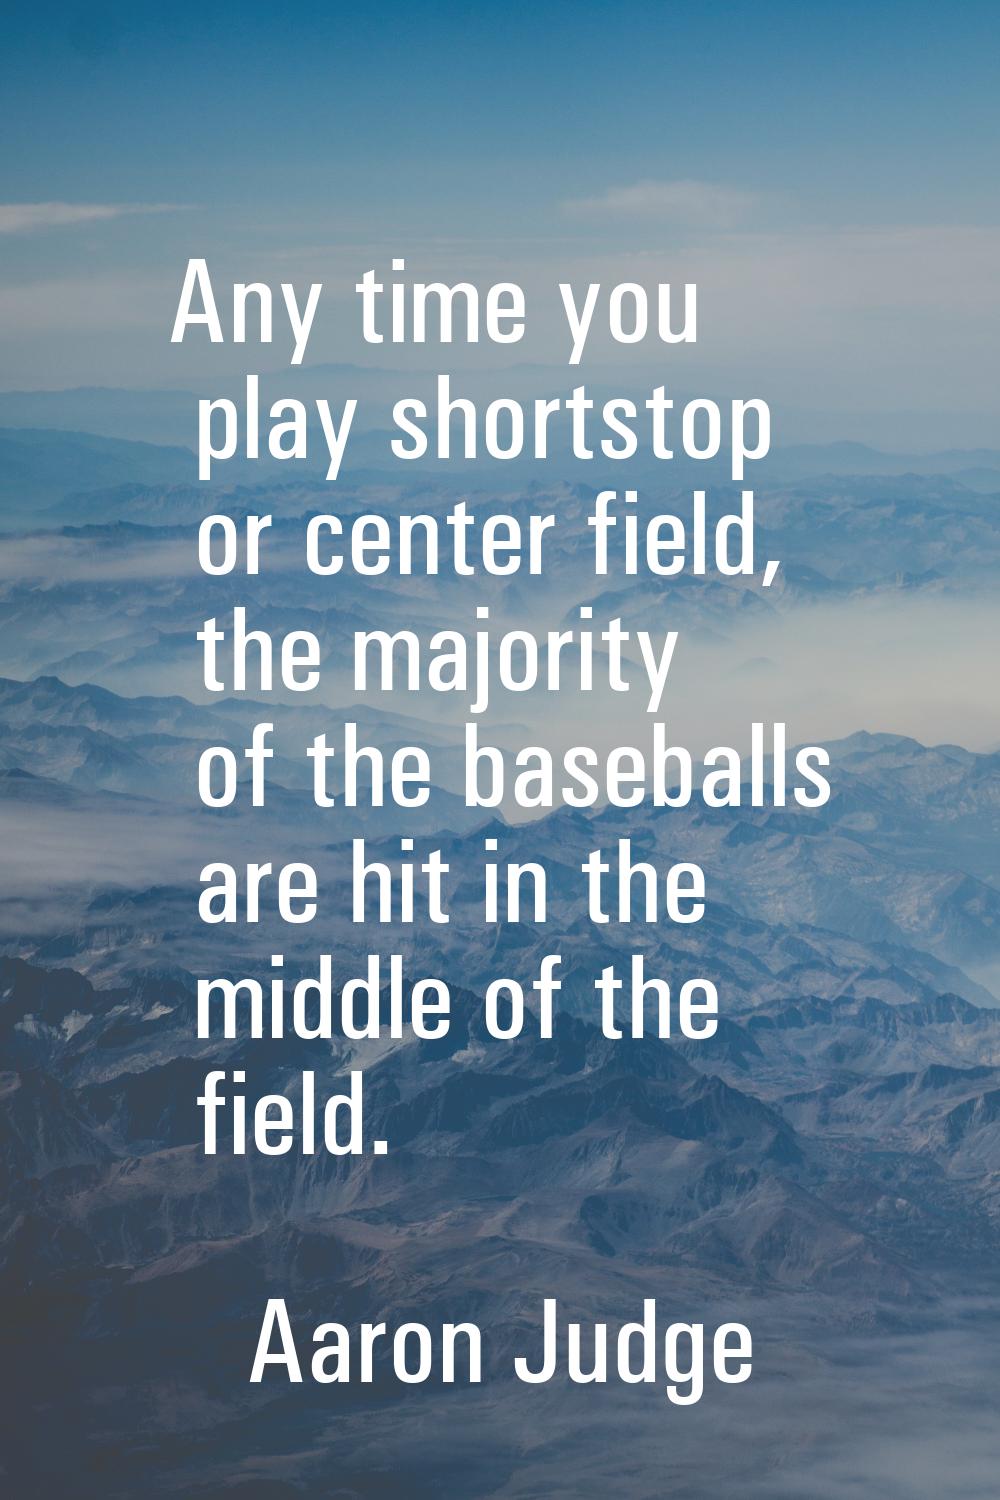 Any time you play shortstop or center field, the majority of the baseballs are hit in the middle of